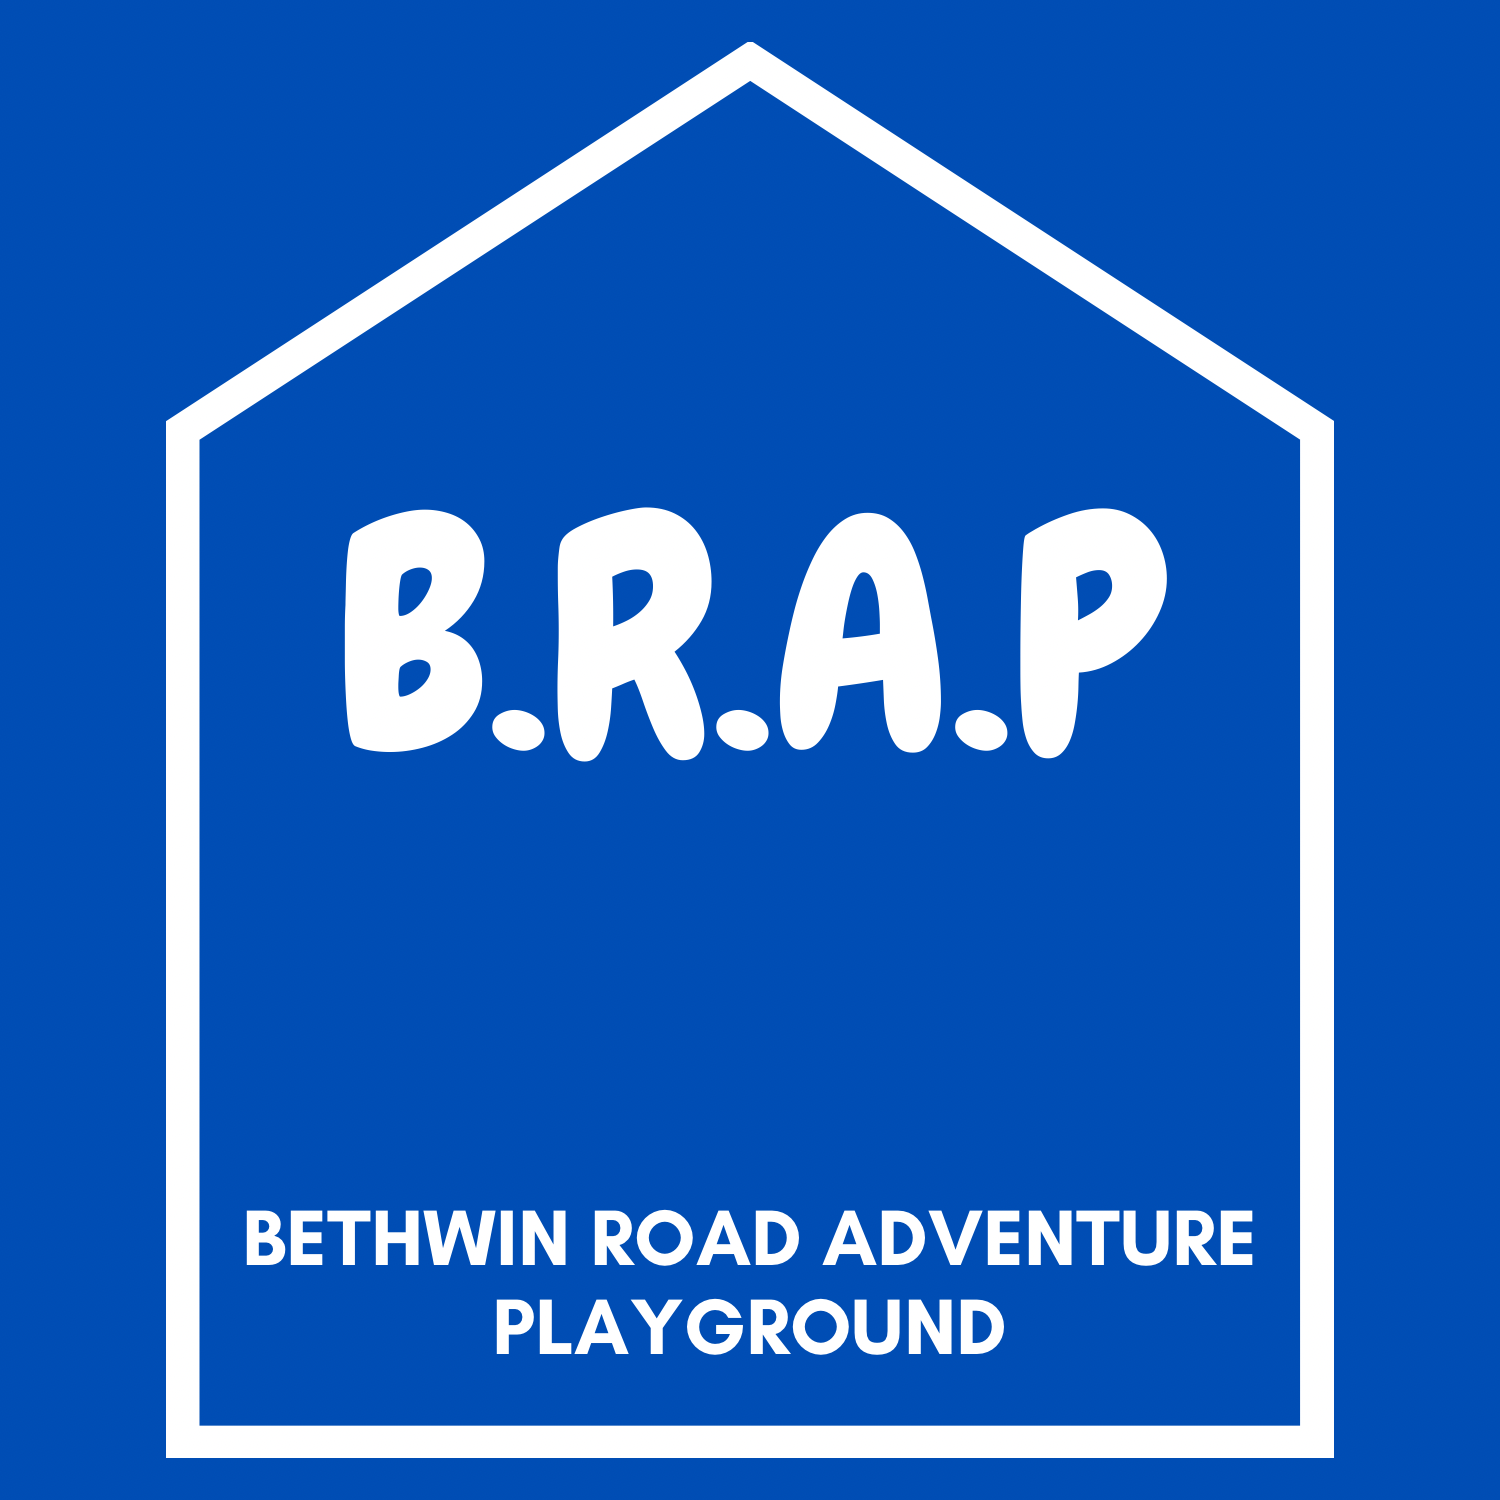 Bethwin Road Adventure Playground, shortened to BRAP, inside the shape of a house.